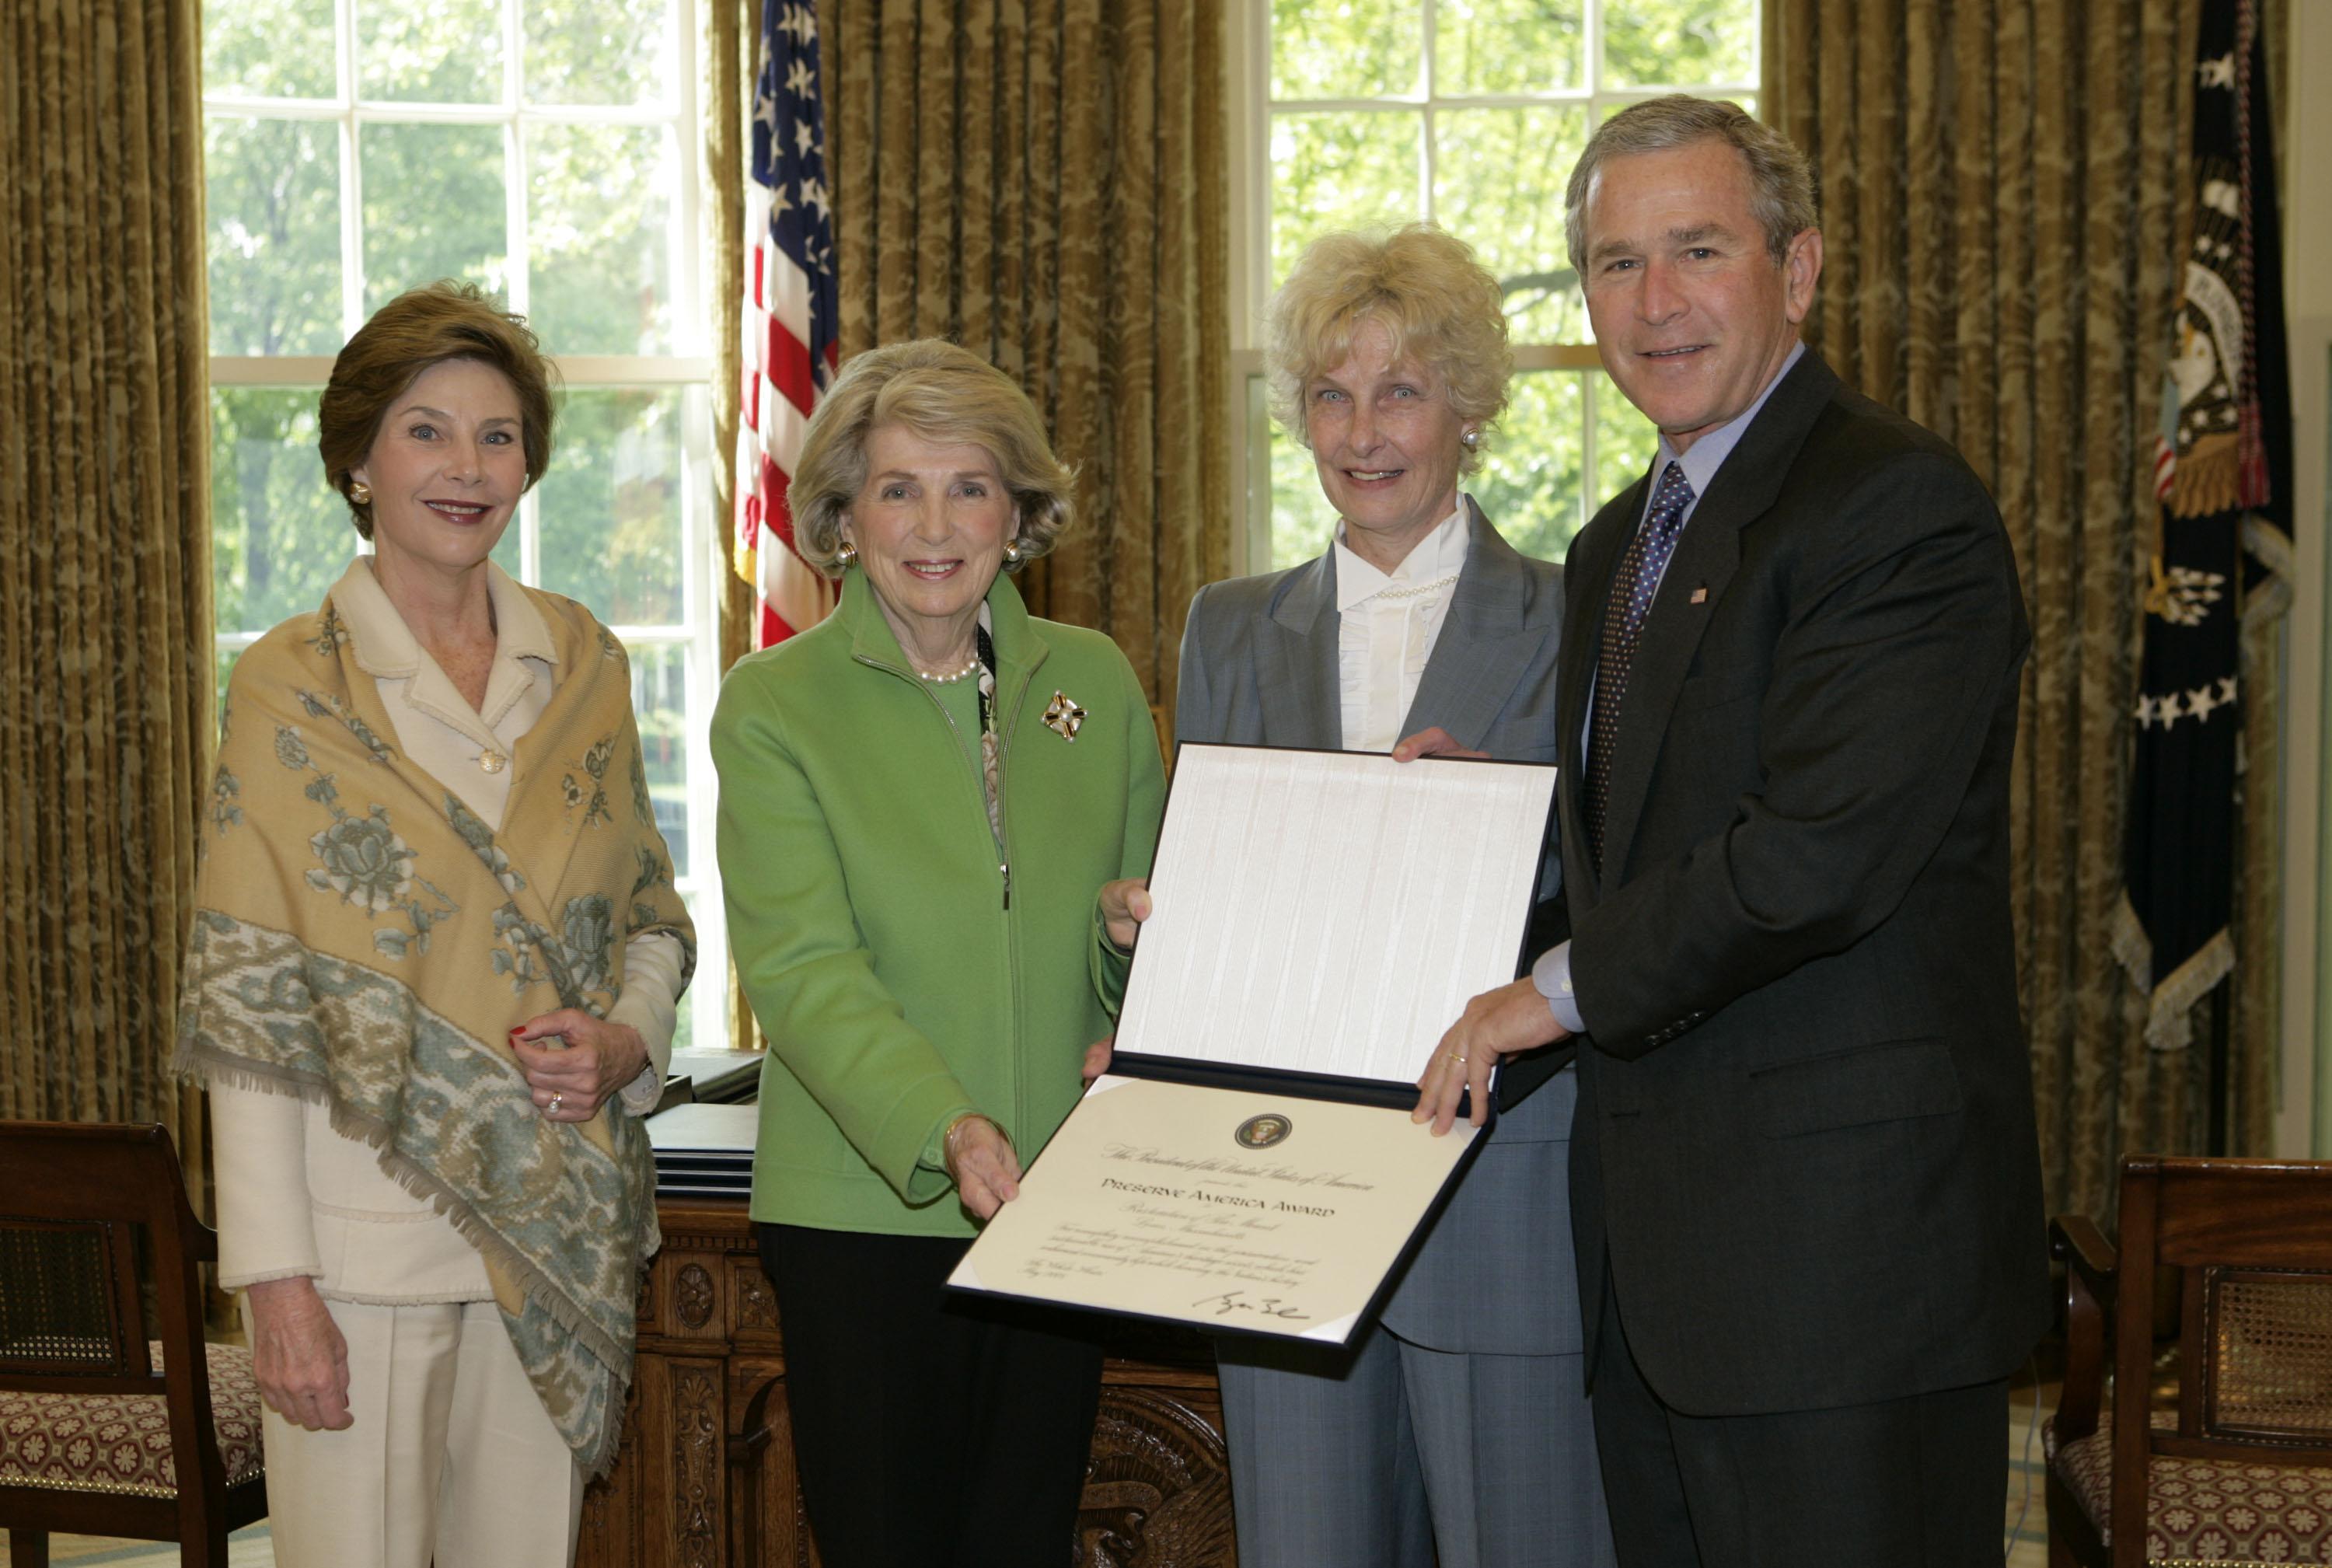 President George W. Bush and Laura Bush present the 2005 Preserve America Presidential Award to members of the Edith Wharton Restoration in the Oval Office Monday, May 2, 2005. They are, from left, Barbara de Marneffe, Co-Chairman, Board of Trustees of Cambridge, Massachusetts, and Stephanie Copeland, President and CEO, of Stockbridge, Massachusetts. (White House photo by Eric Draper)